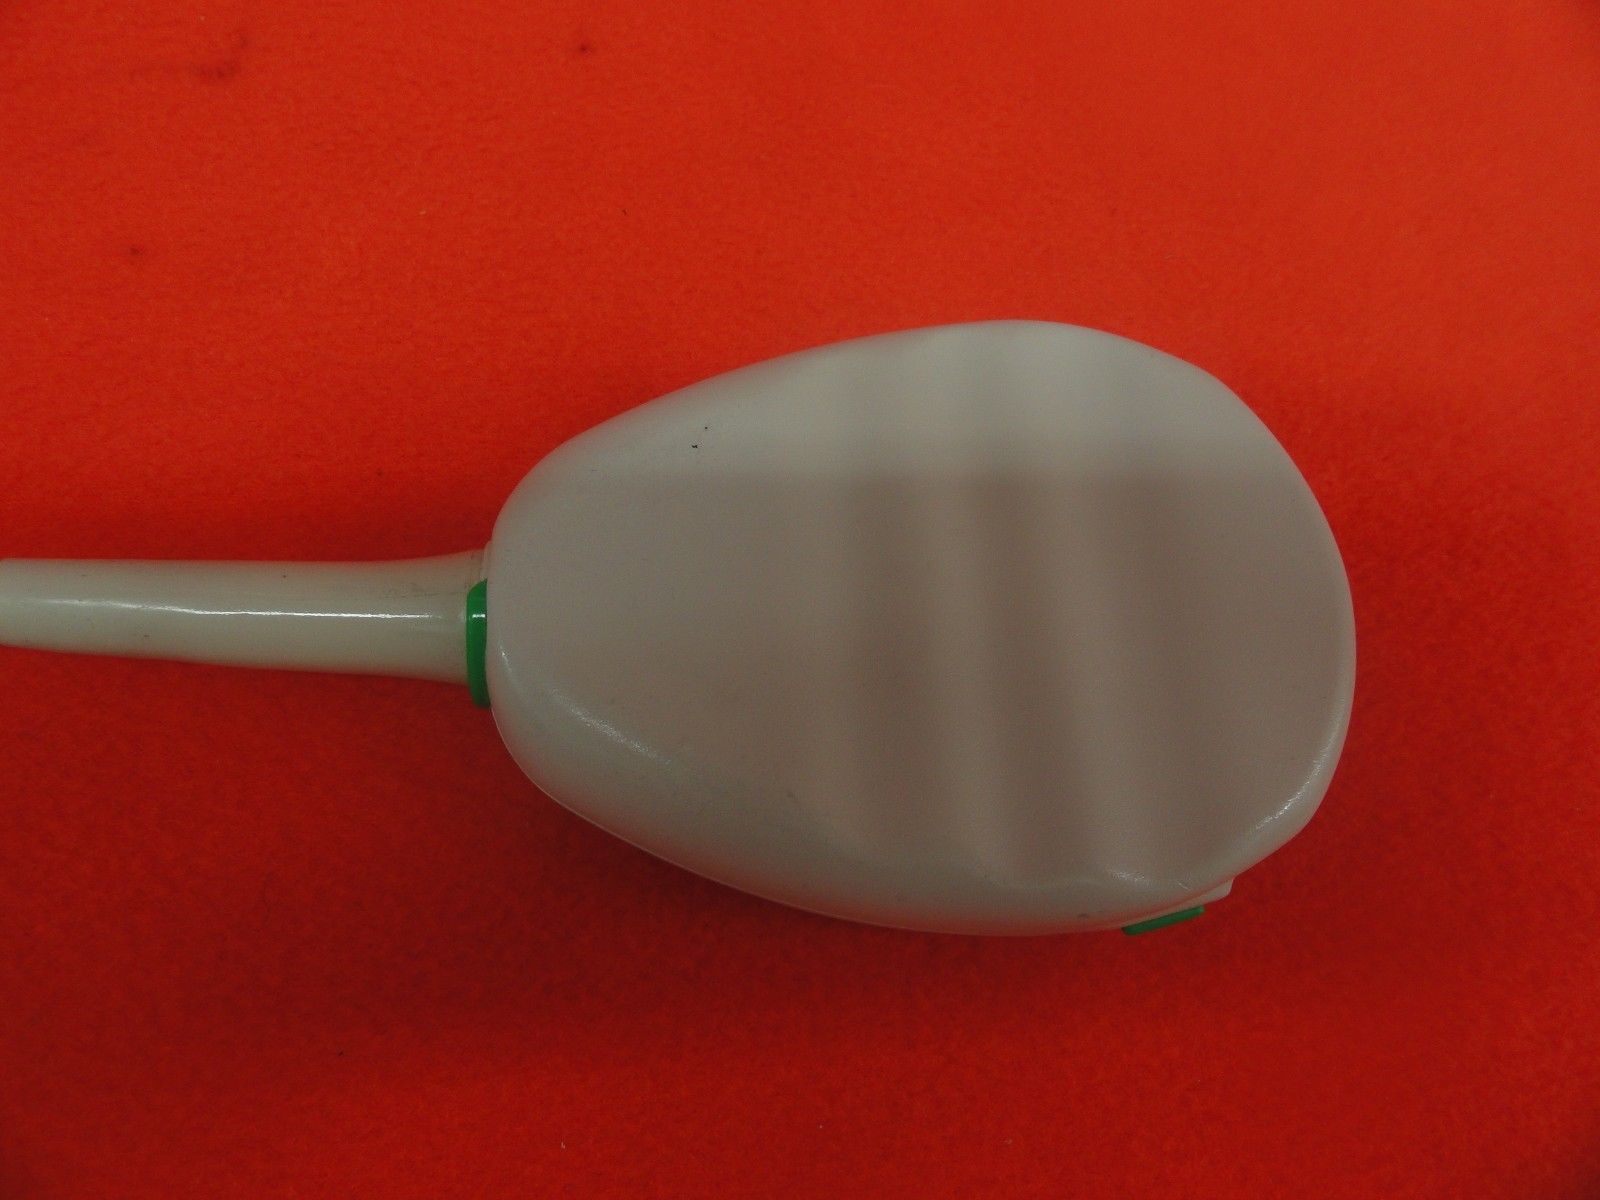 ATL C7-4 40R Curved Array Probe For ATL UM9 HDI, HDI 1500/ 3000 HDI 5000 (5840 ) DIAGNOSTIC ULTRASOUND MACHINES FOR SALE